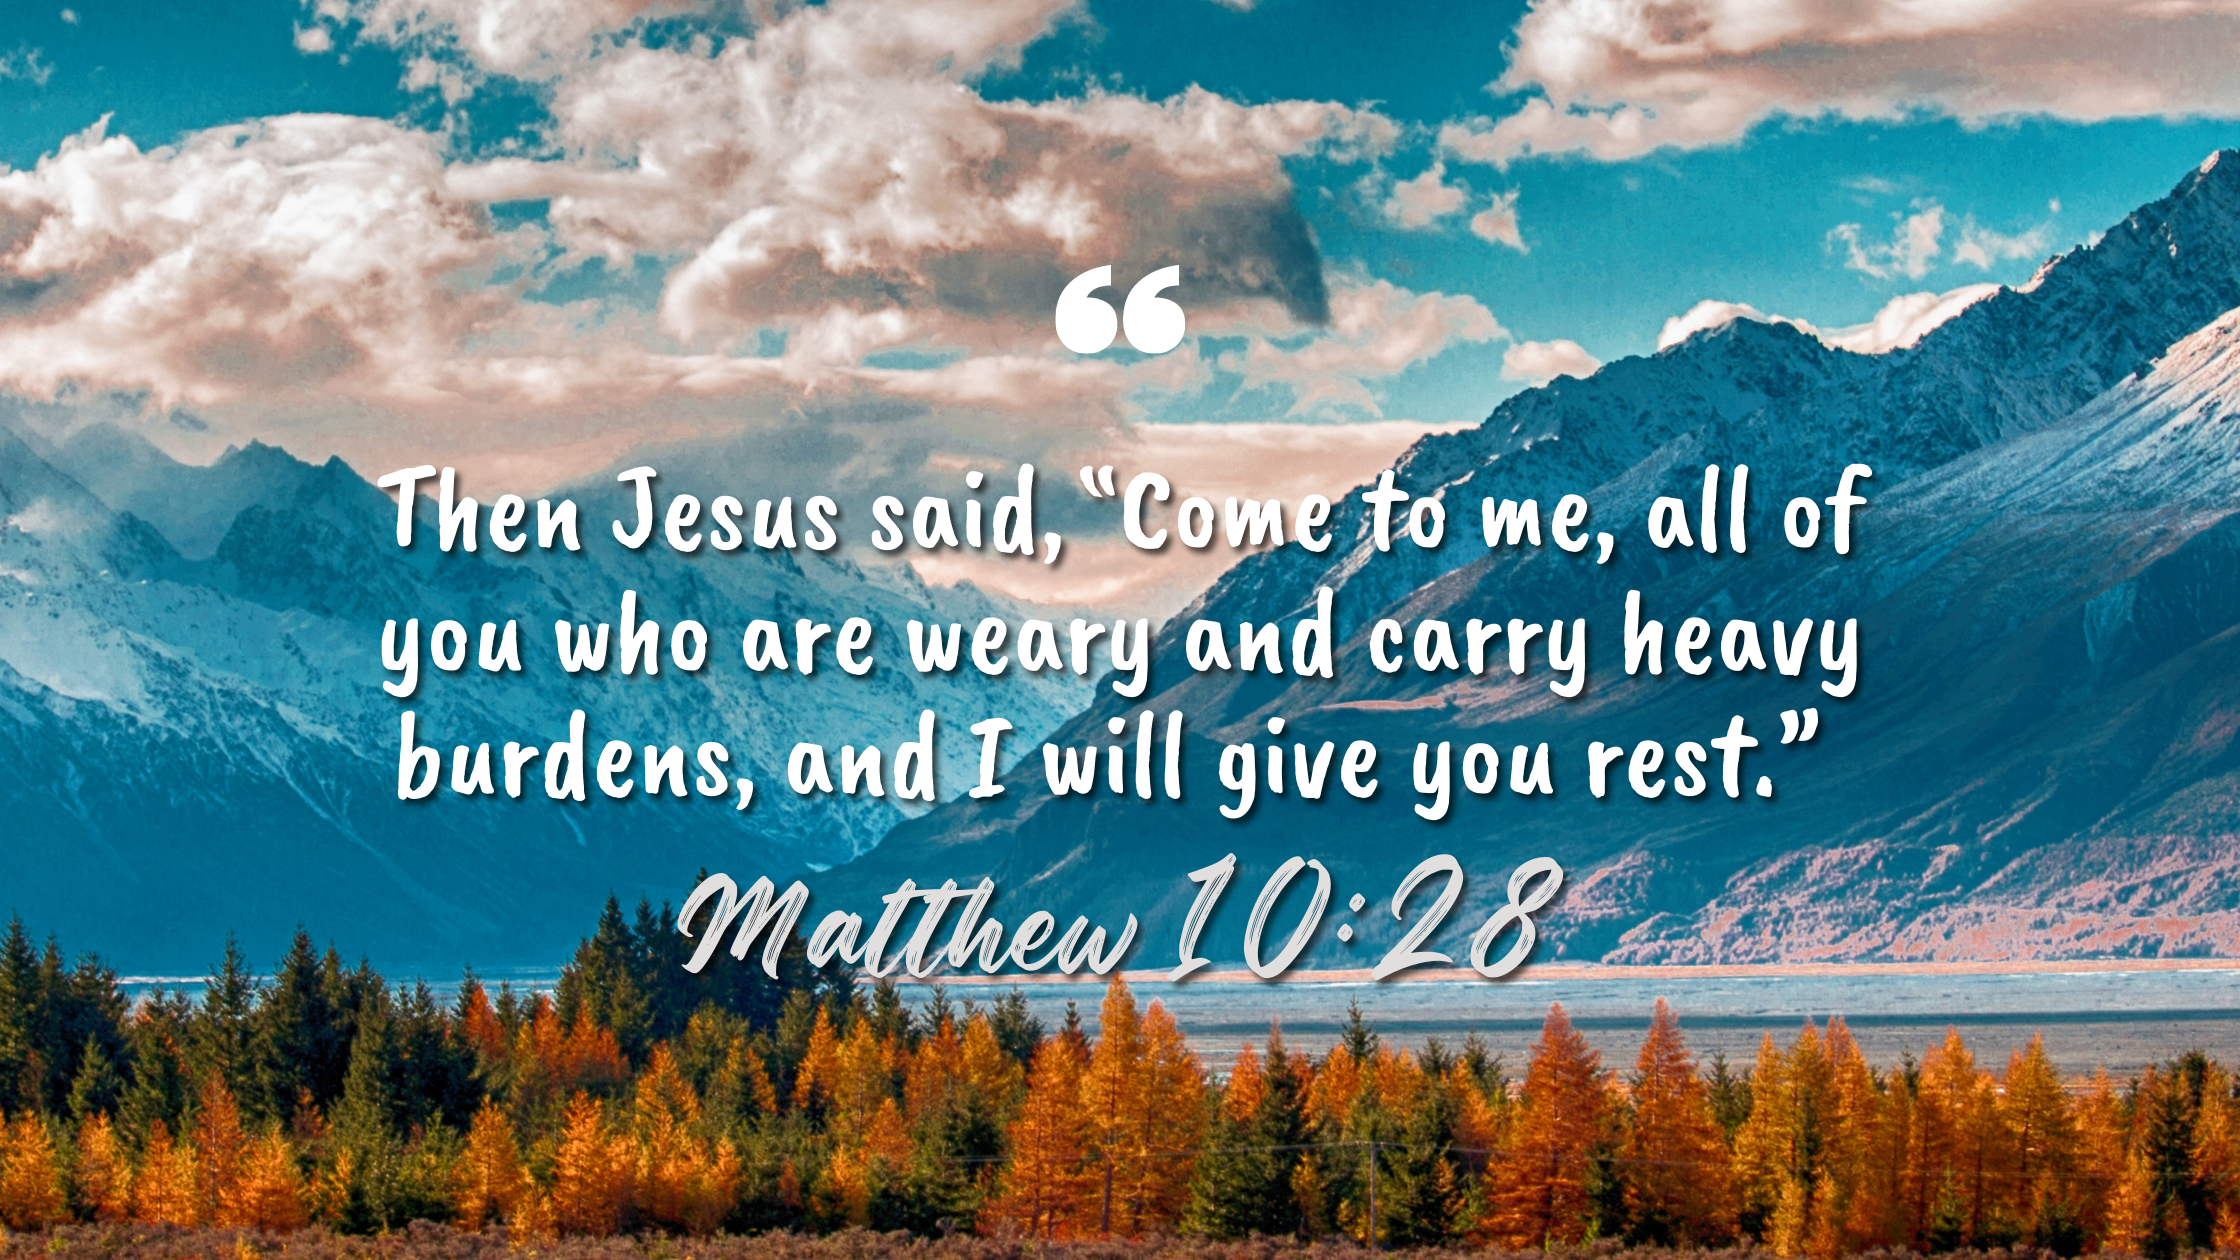 Then Jesus said, “Come to me, all of you who are weary and carry heavy burdens, and I will give you rest.”